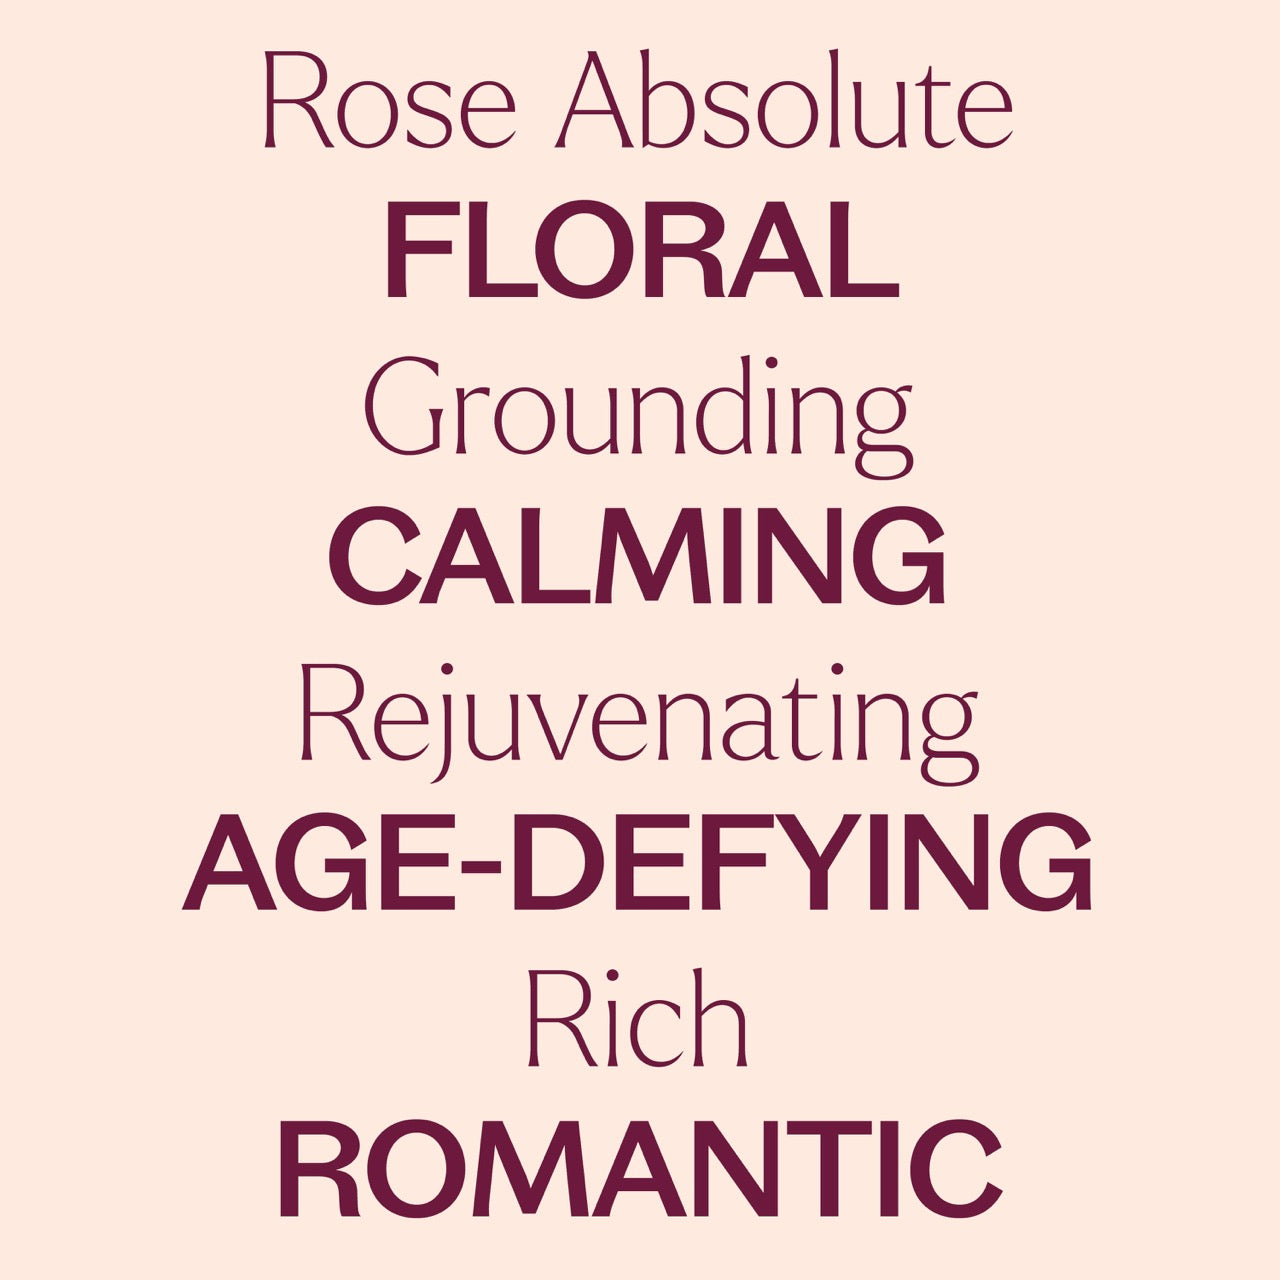 Rose Essential Oil Pre-Diluted Roll-On key features: floral, grounding, calming, rejuvenating, age-defying, rich, romantic